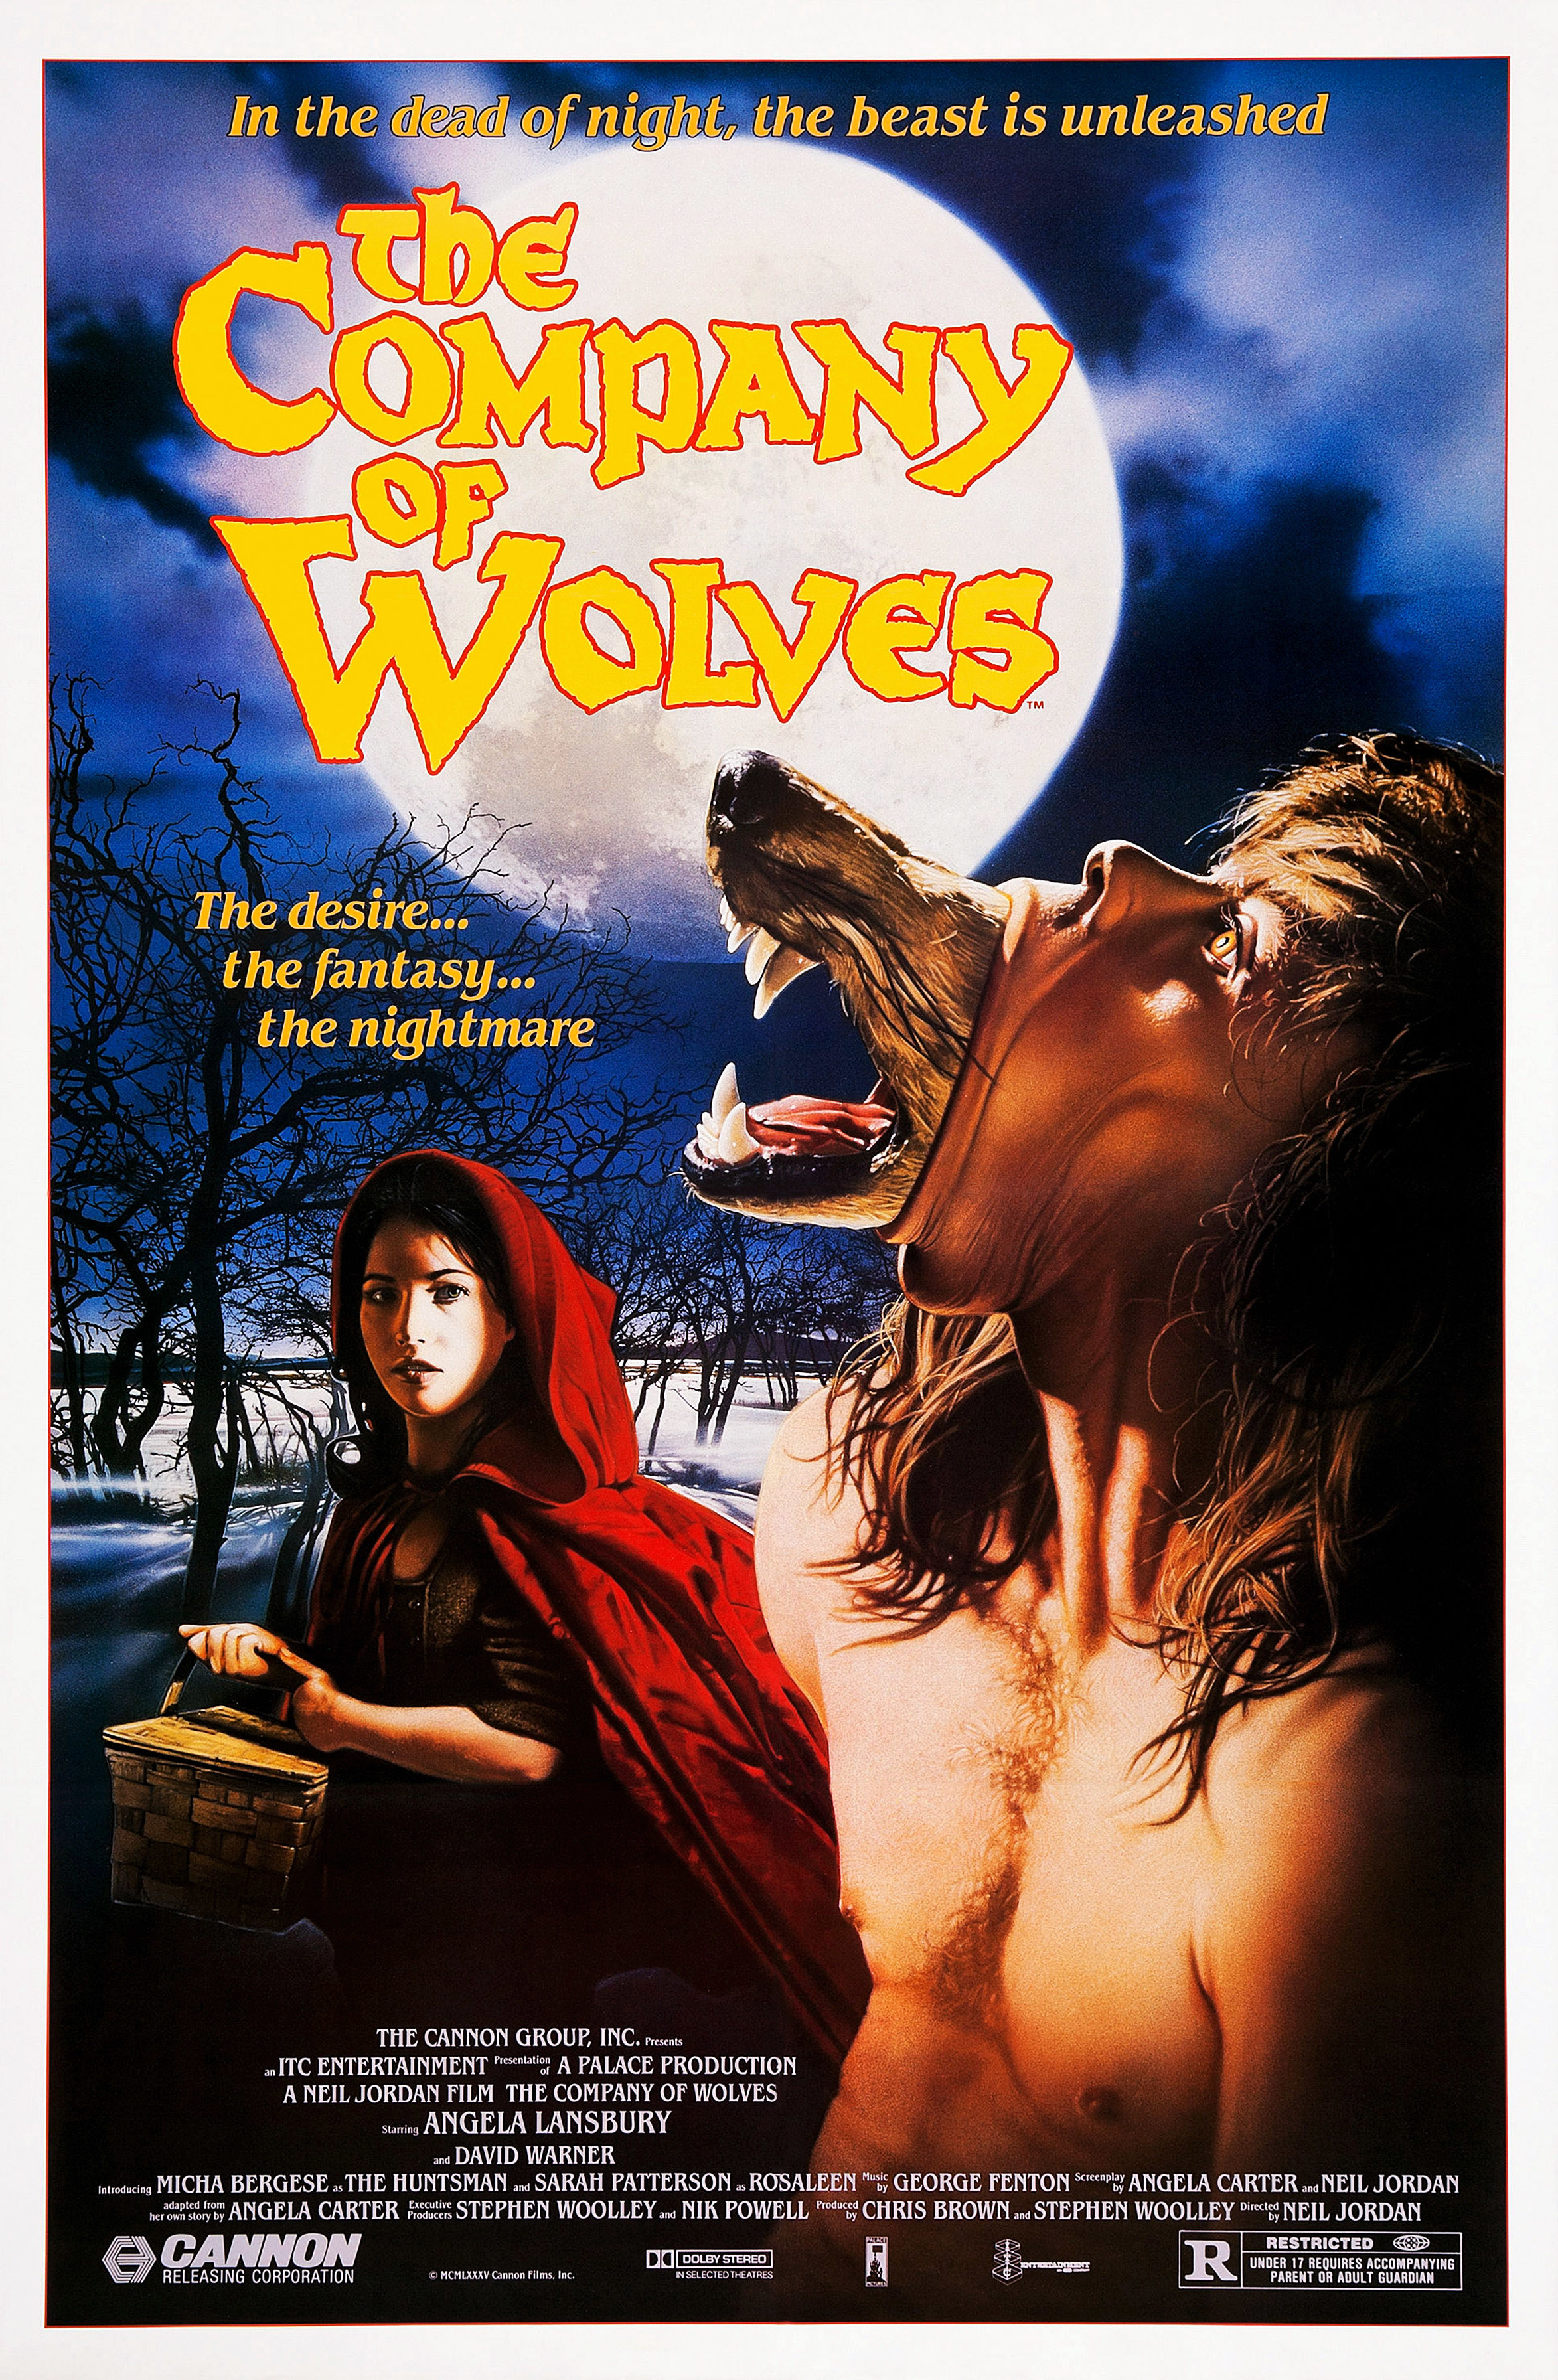 The official poster for &quot;The Company of Wolves&quot; which features a young woman dressed in a red hood looking at a man slowly transforming into a werewolf